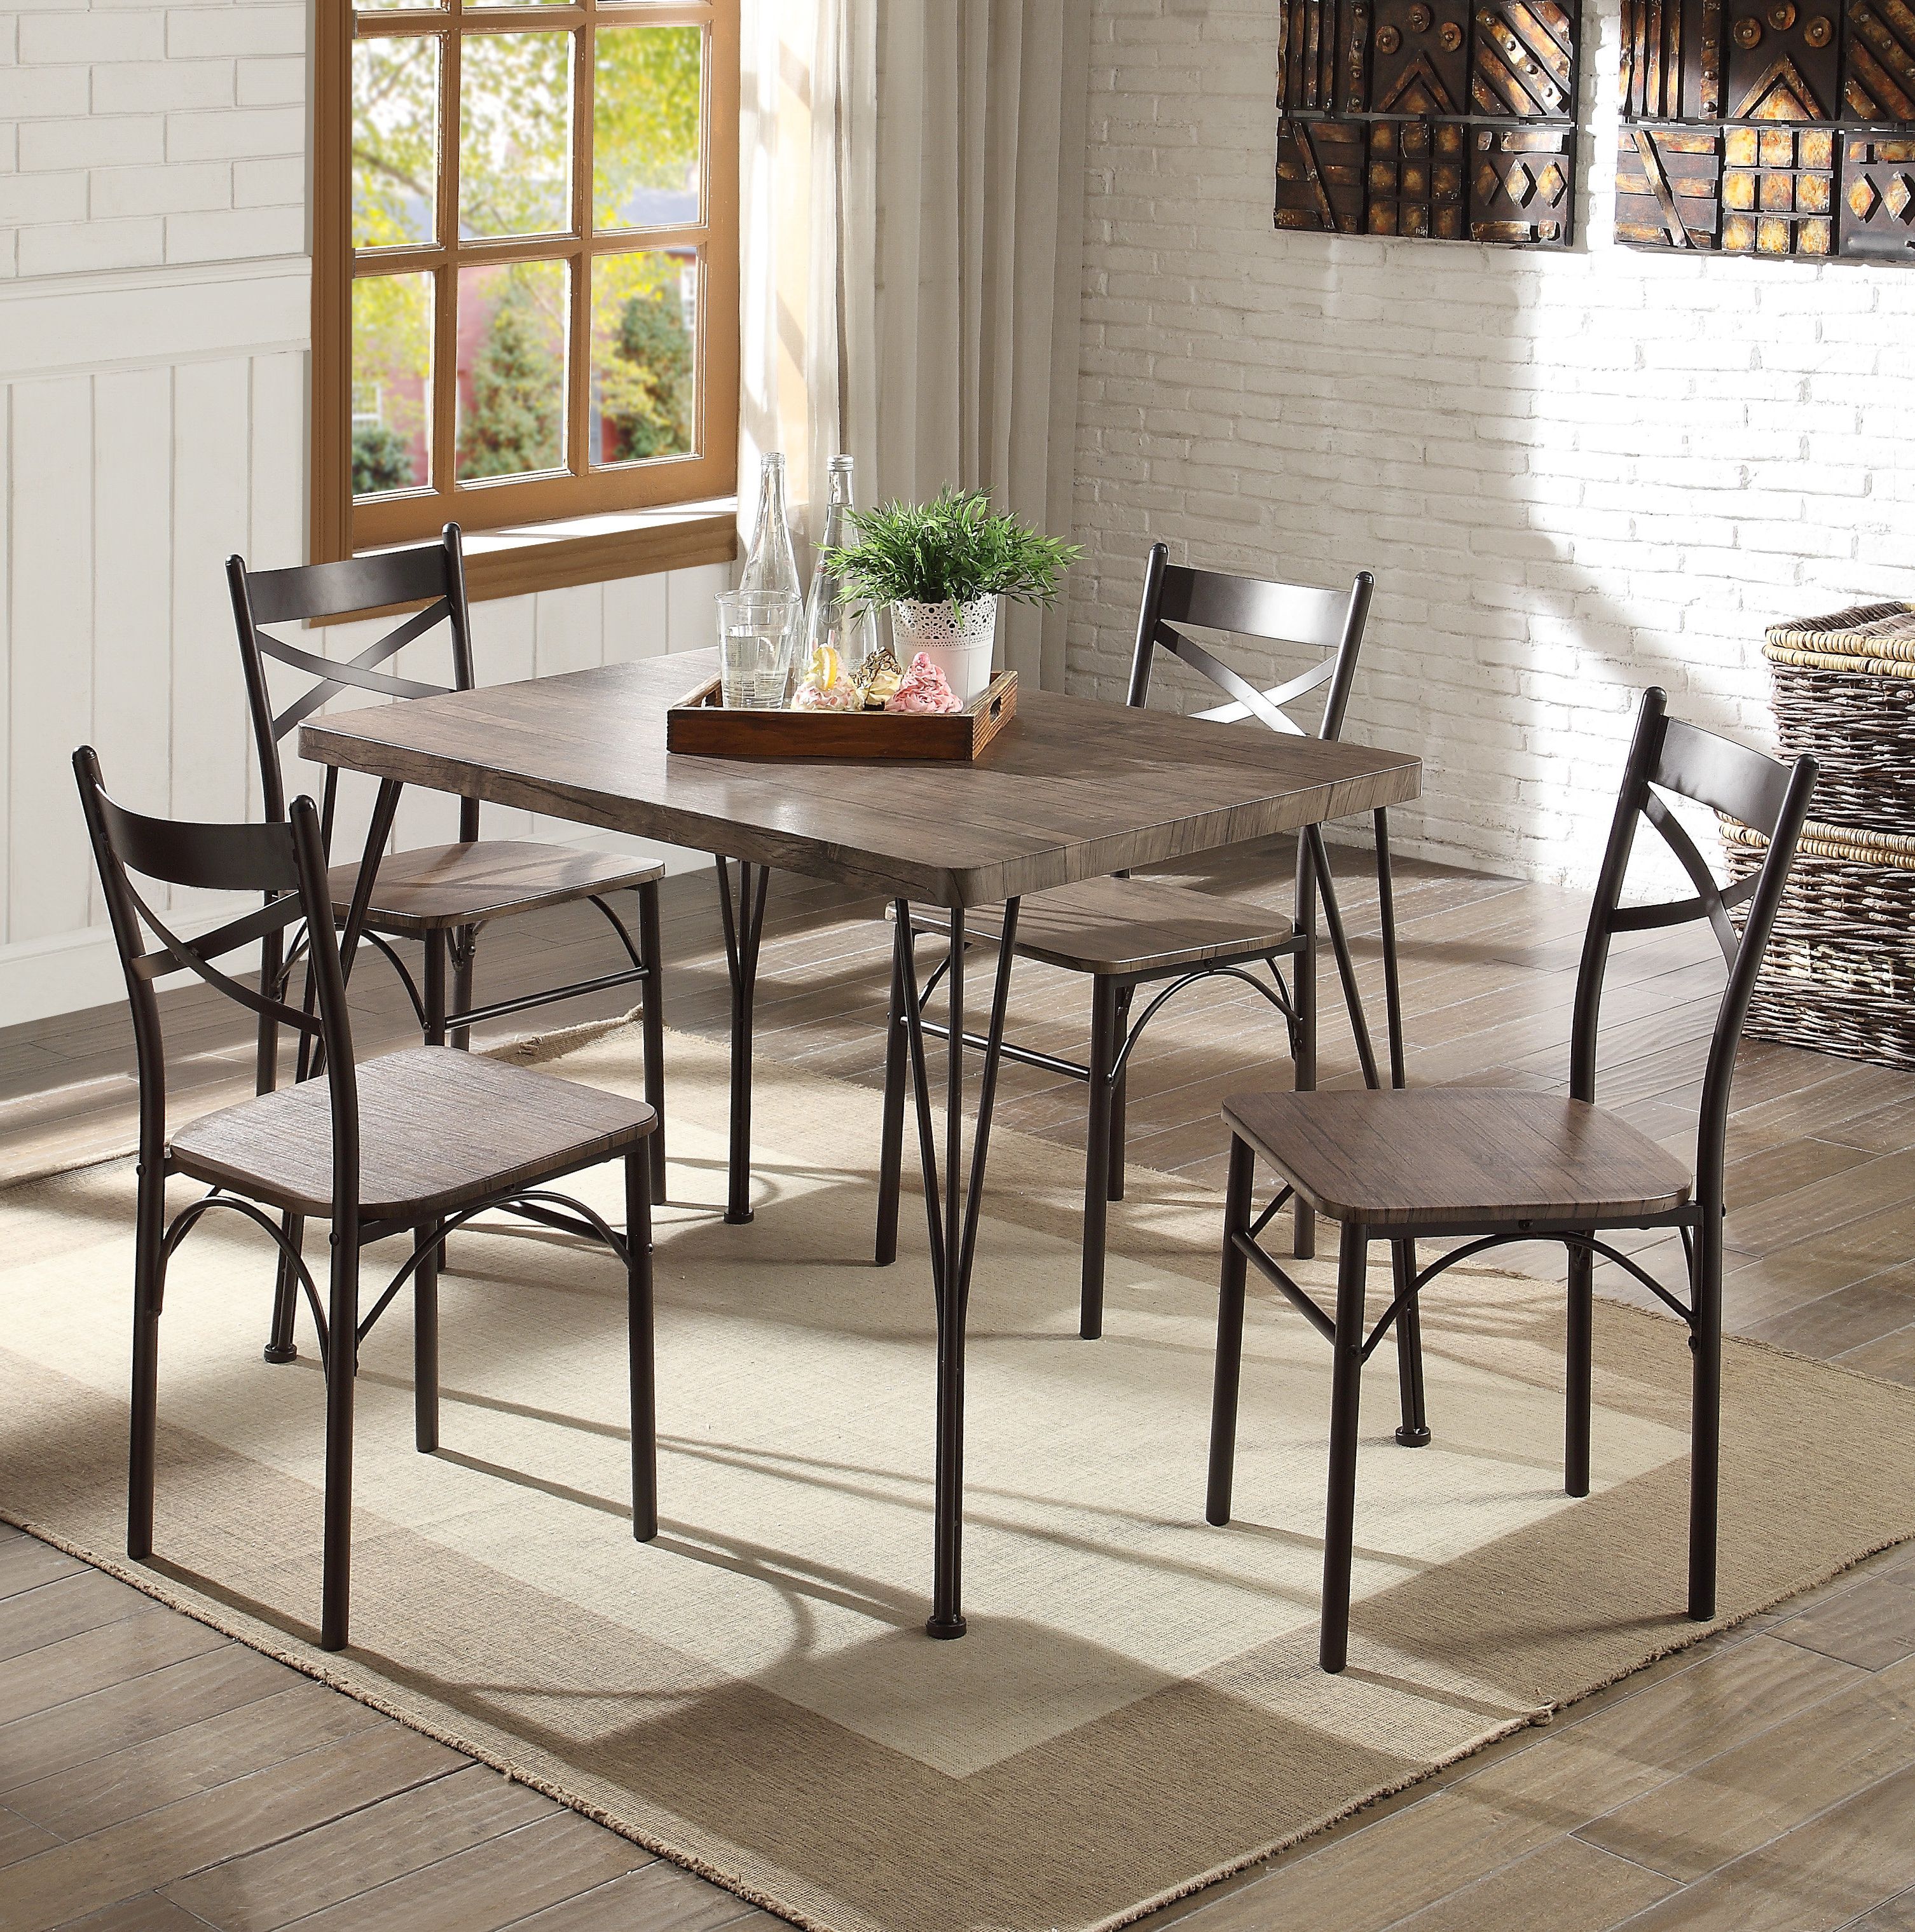 Middleport 5 Piece Dining Sets Inside Most Current Andover Mills Middleport 5 Piece Dining Set & Reviews (View 1 of 25)